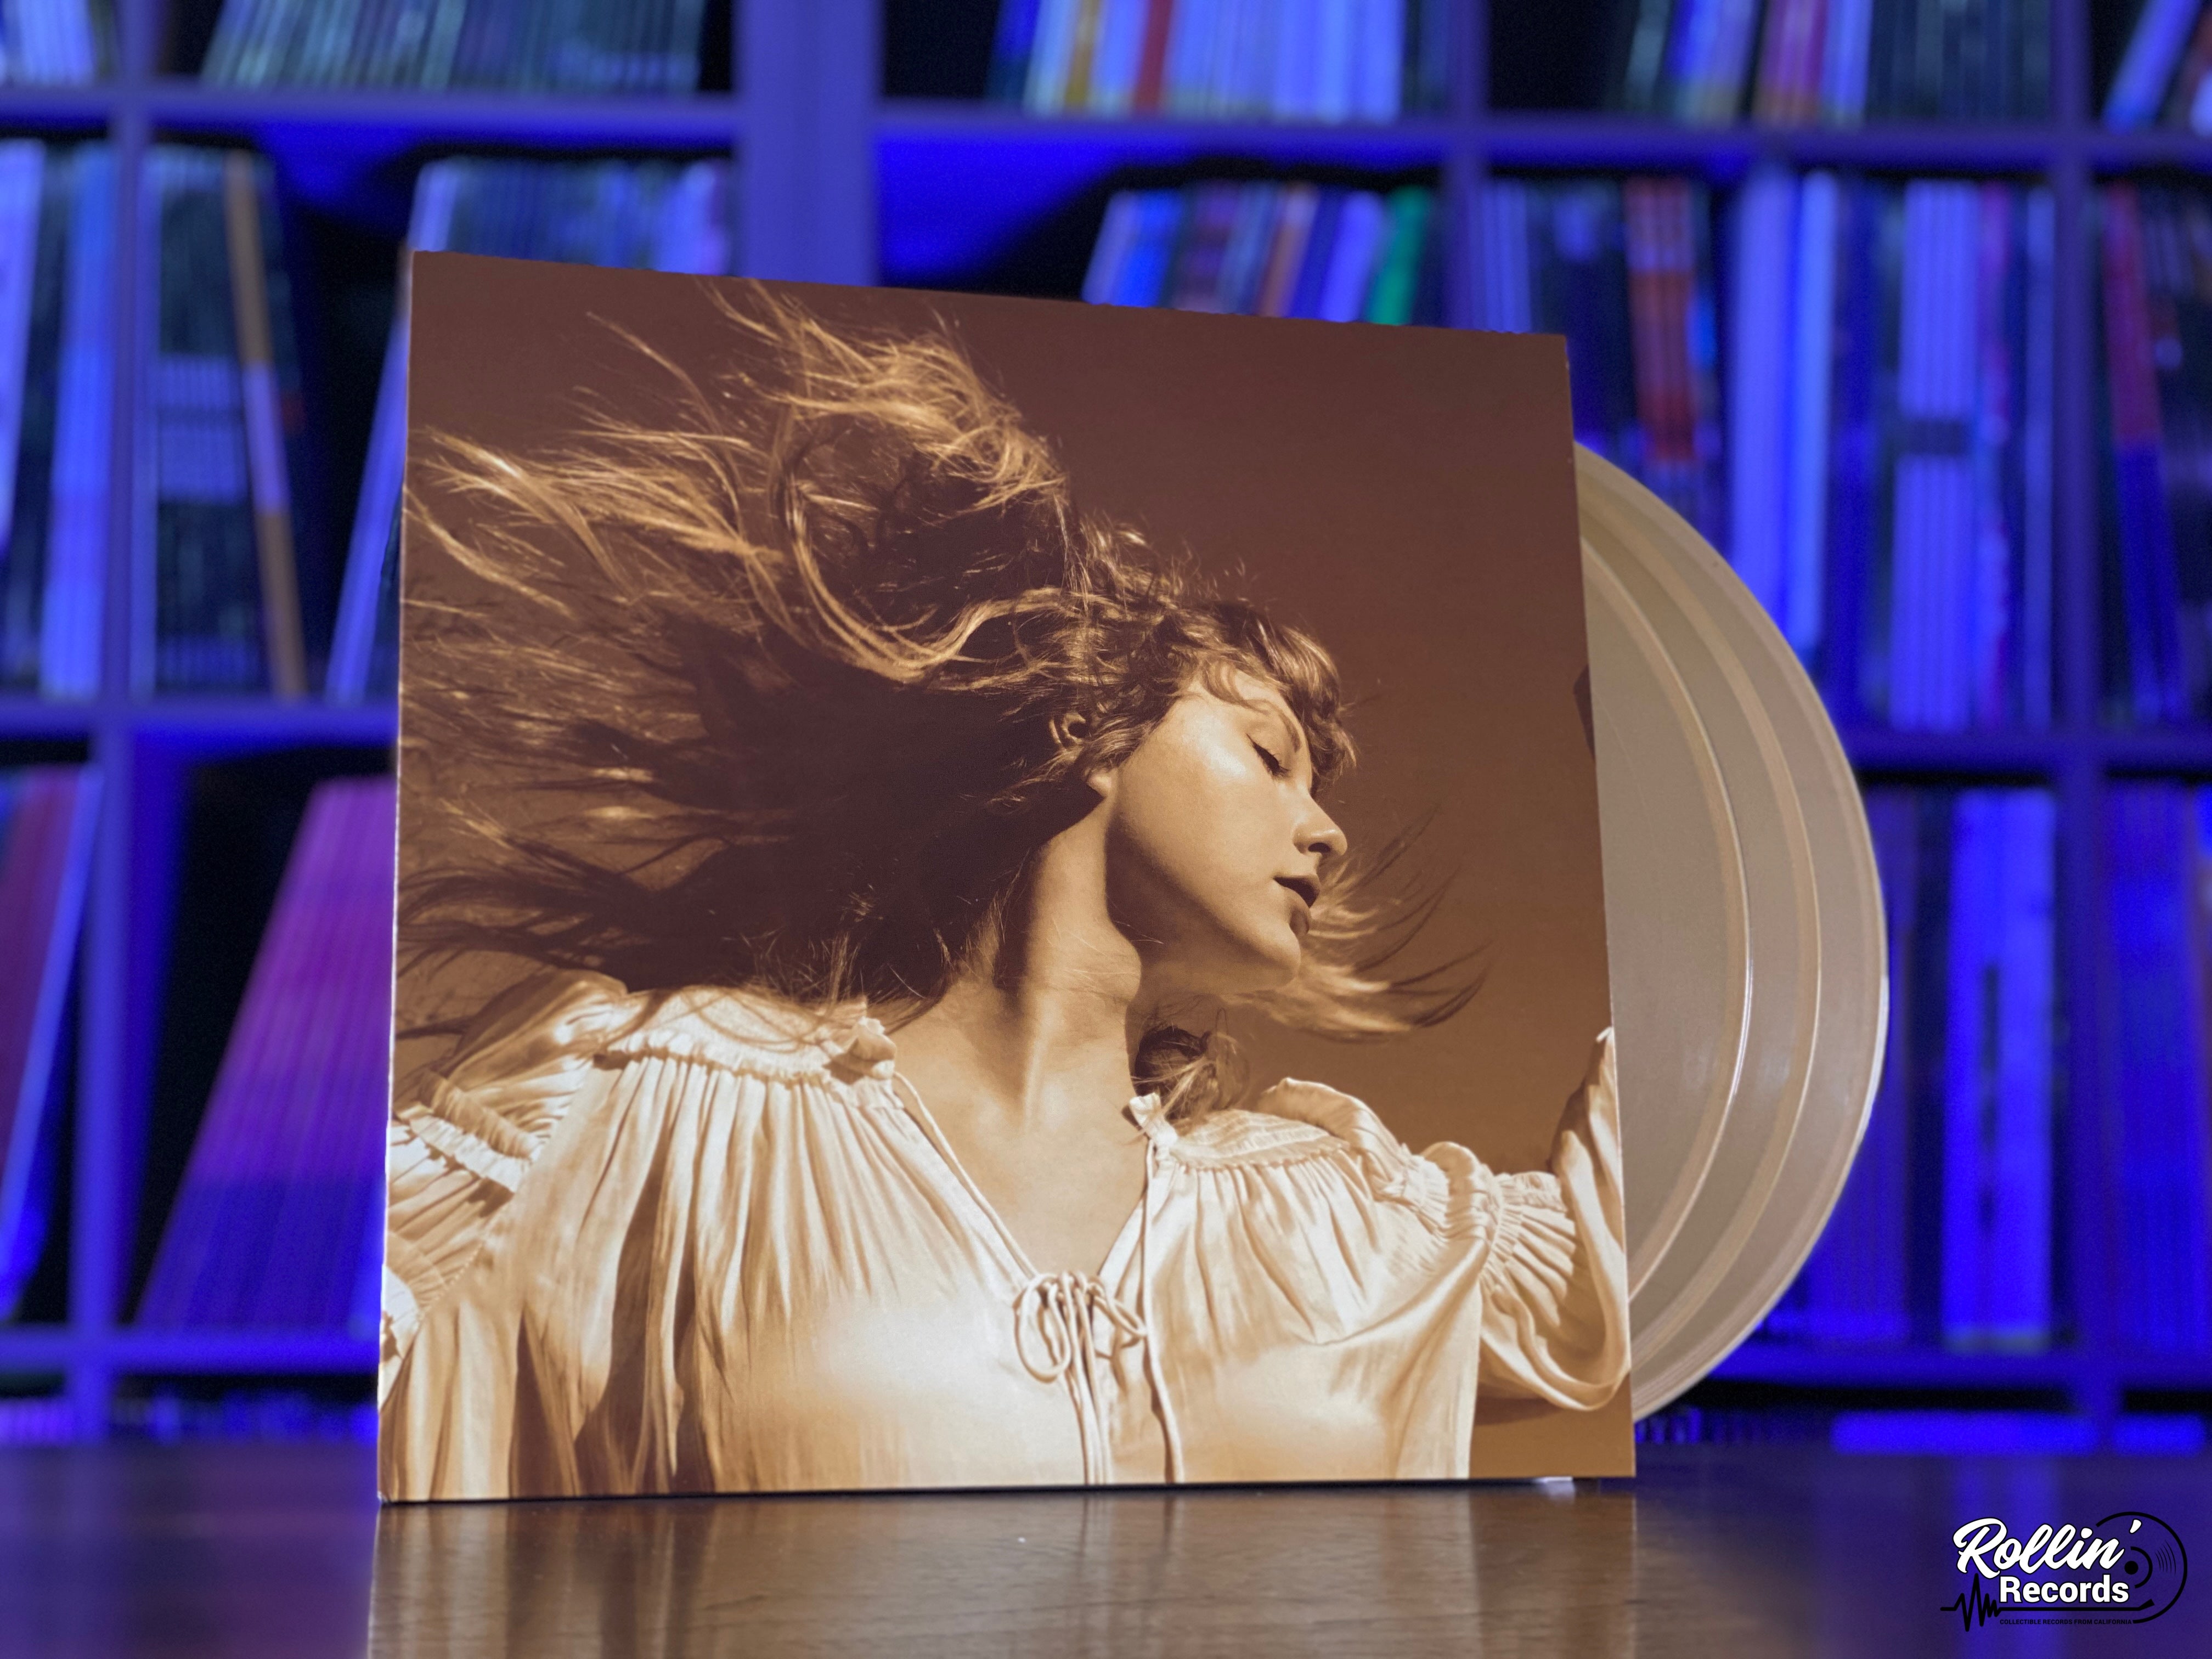 Taylor Swift - Fearless (Taylor's Version)(Gold Vinyl) – Rollin' Records